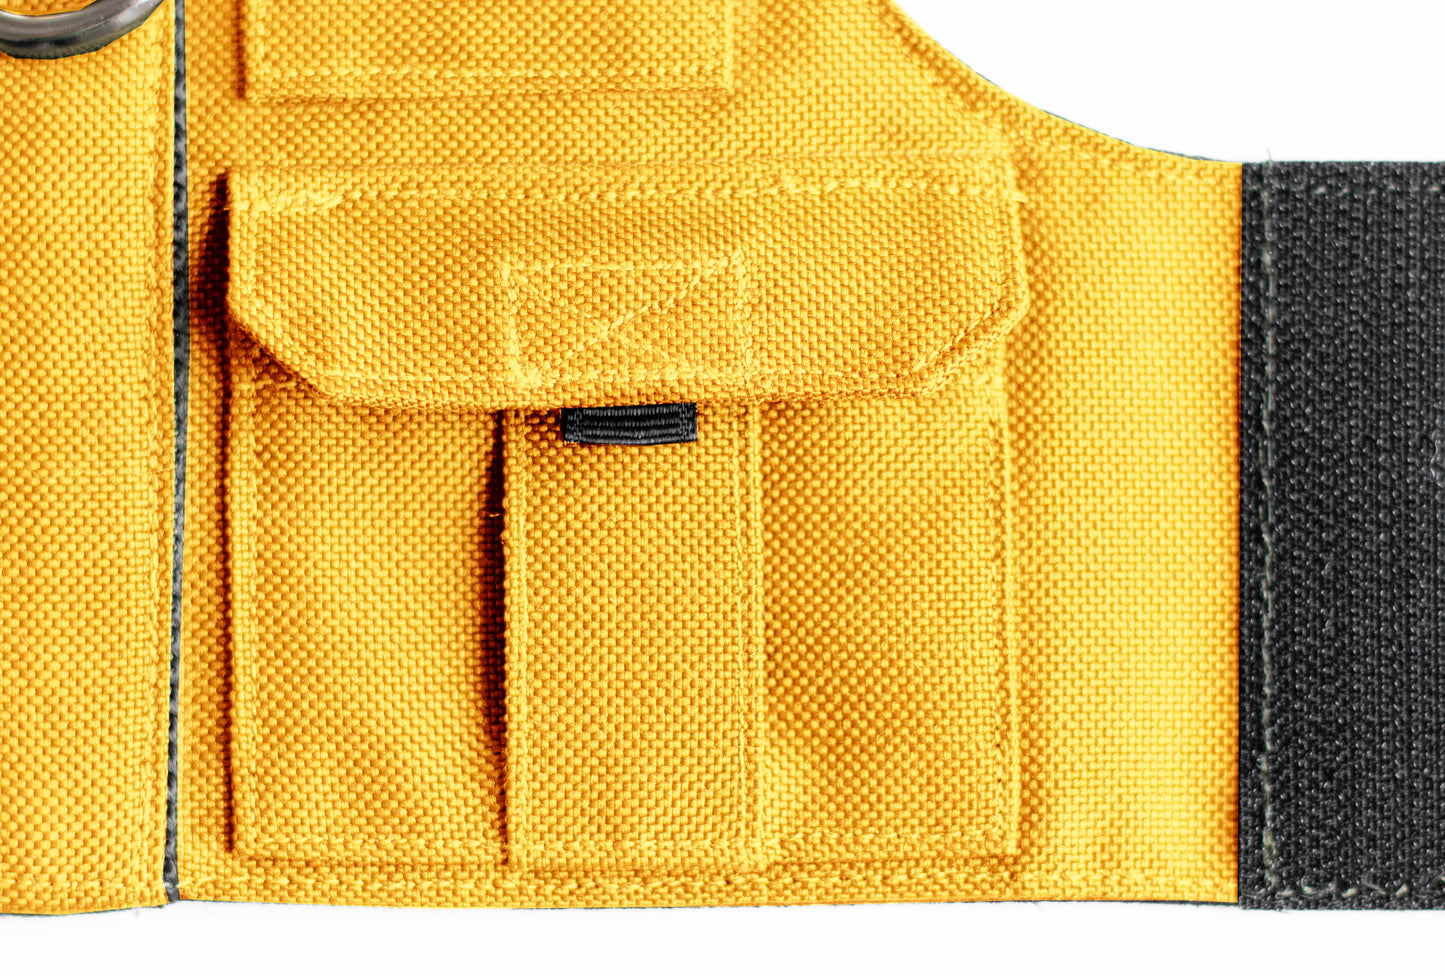 Yellow Fishing vest. Custom-made Water-repellent Cat Harness with Pockets for GPS-tracker